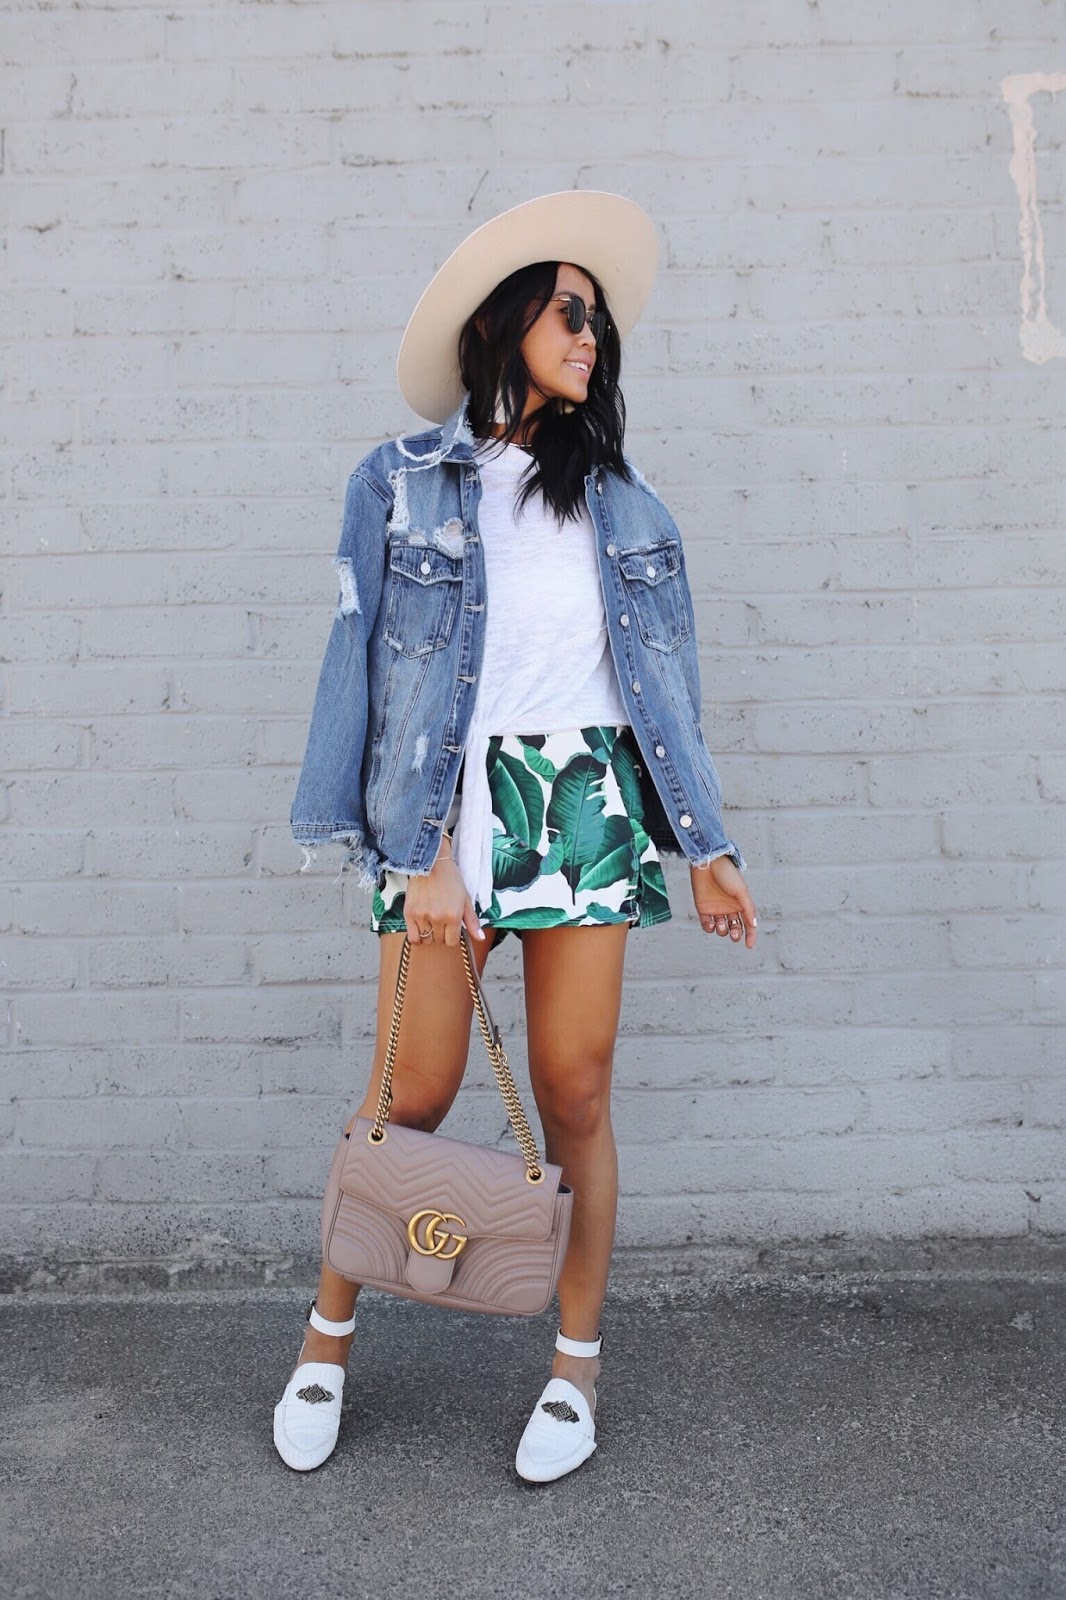 How to Style Denim Jacket for Summer